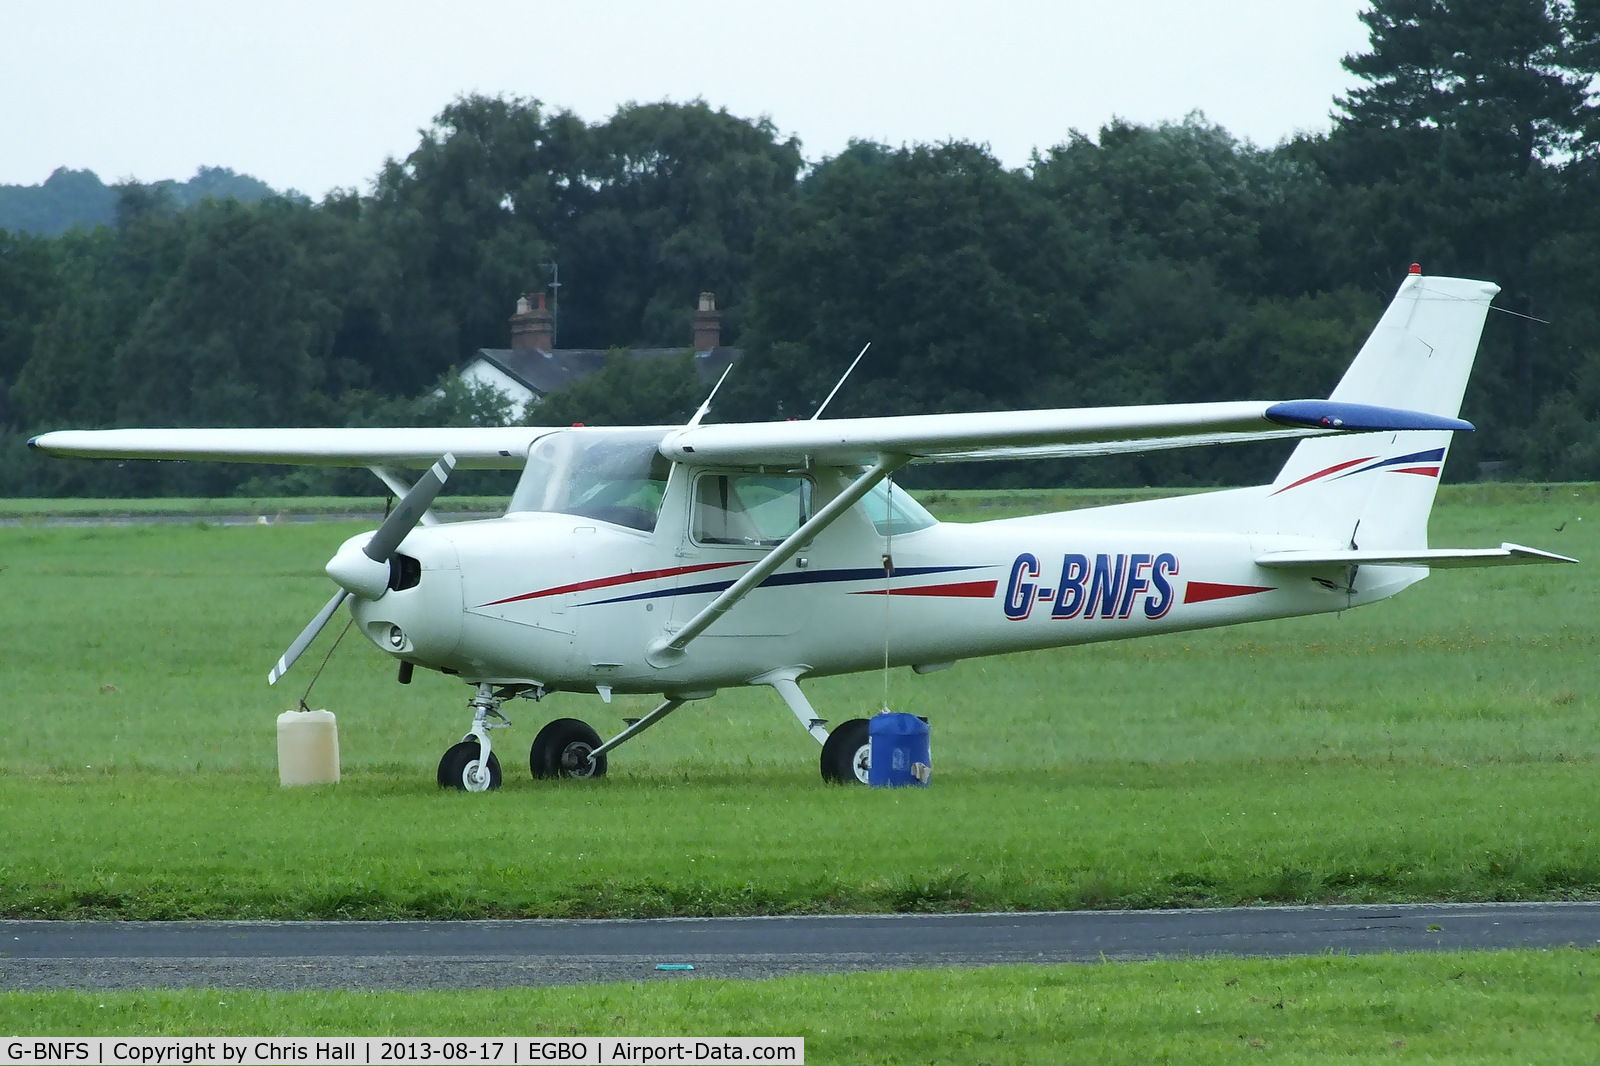 G-BNFS, 1979 Cessna 152 C/N 15283899, privately owned